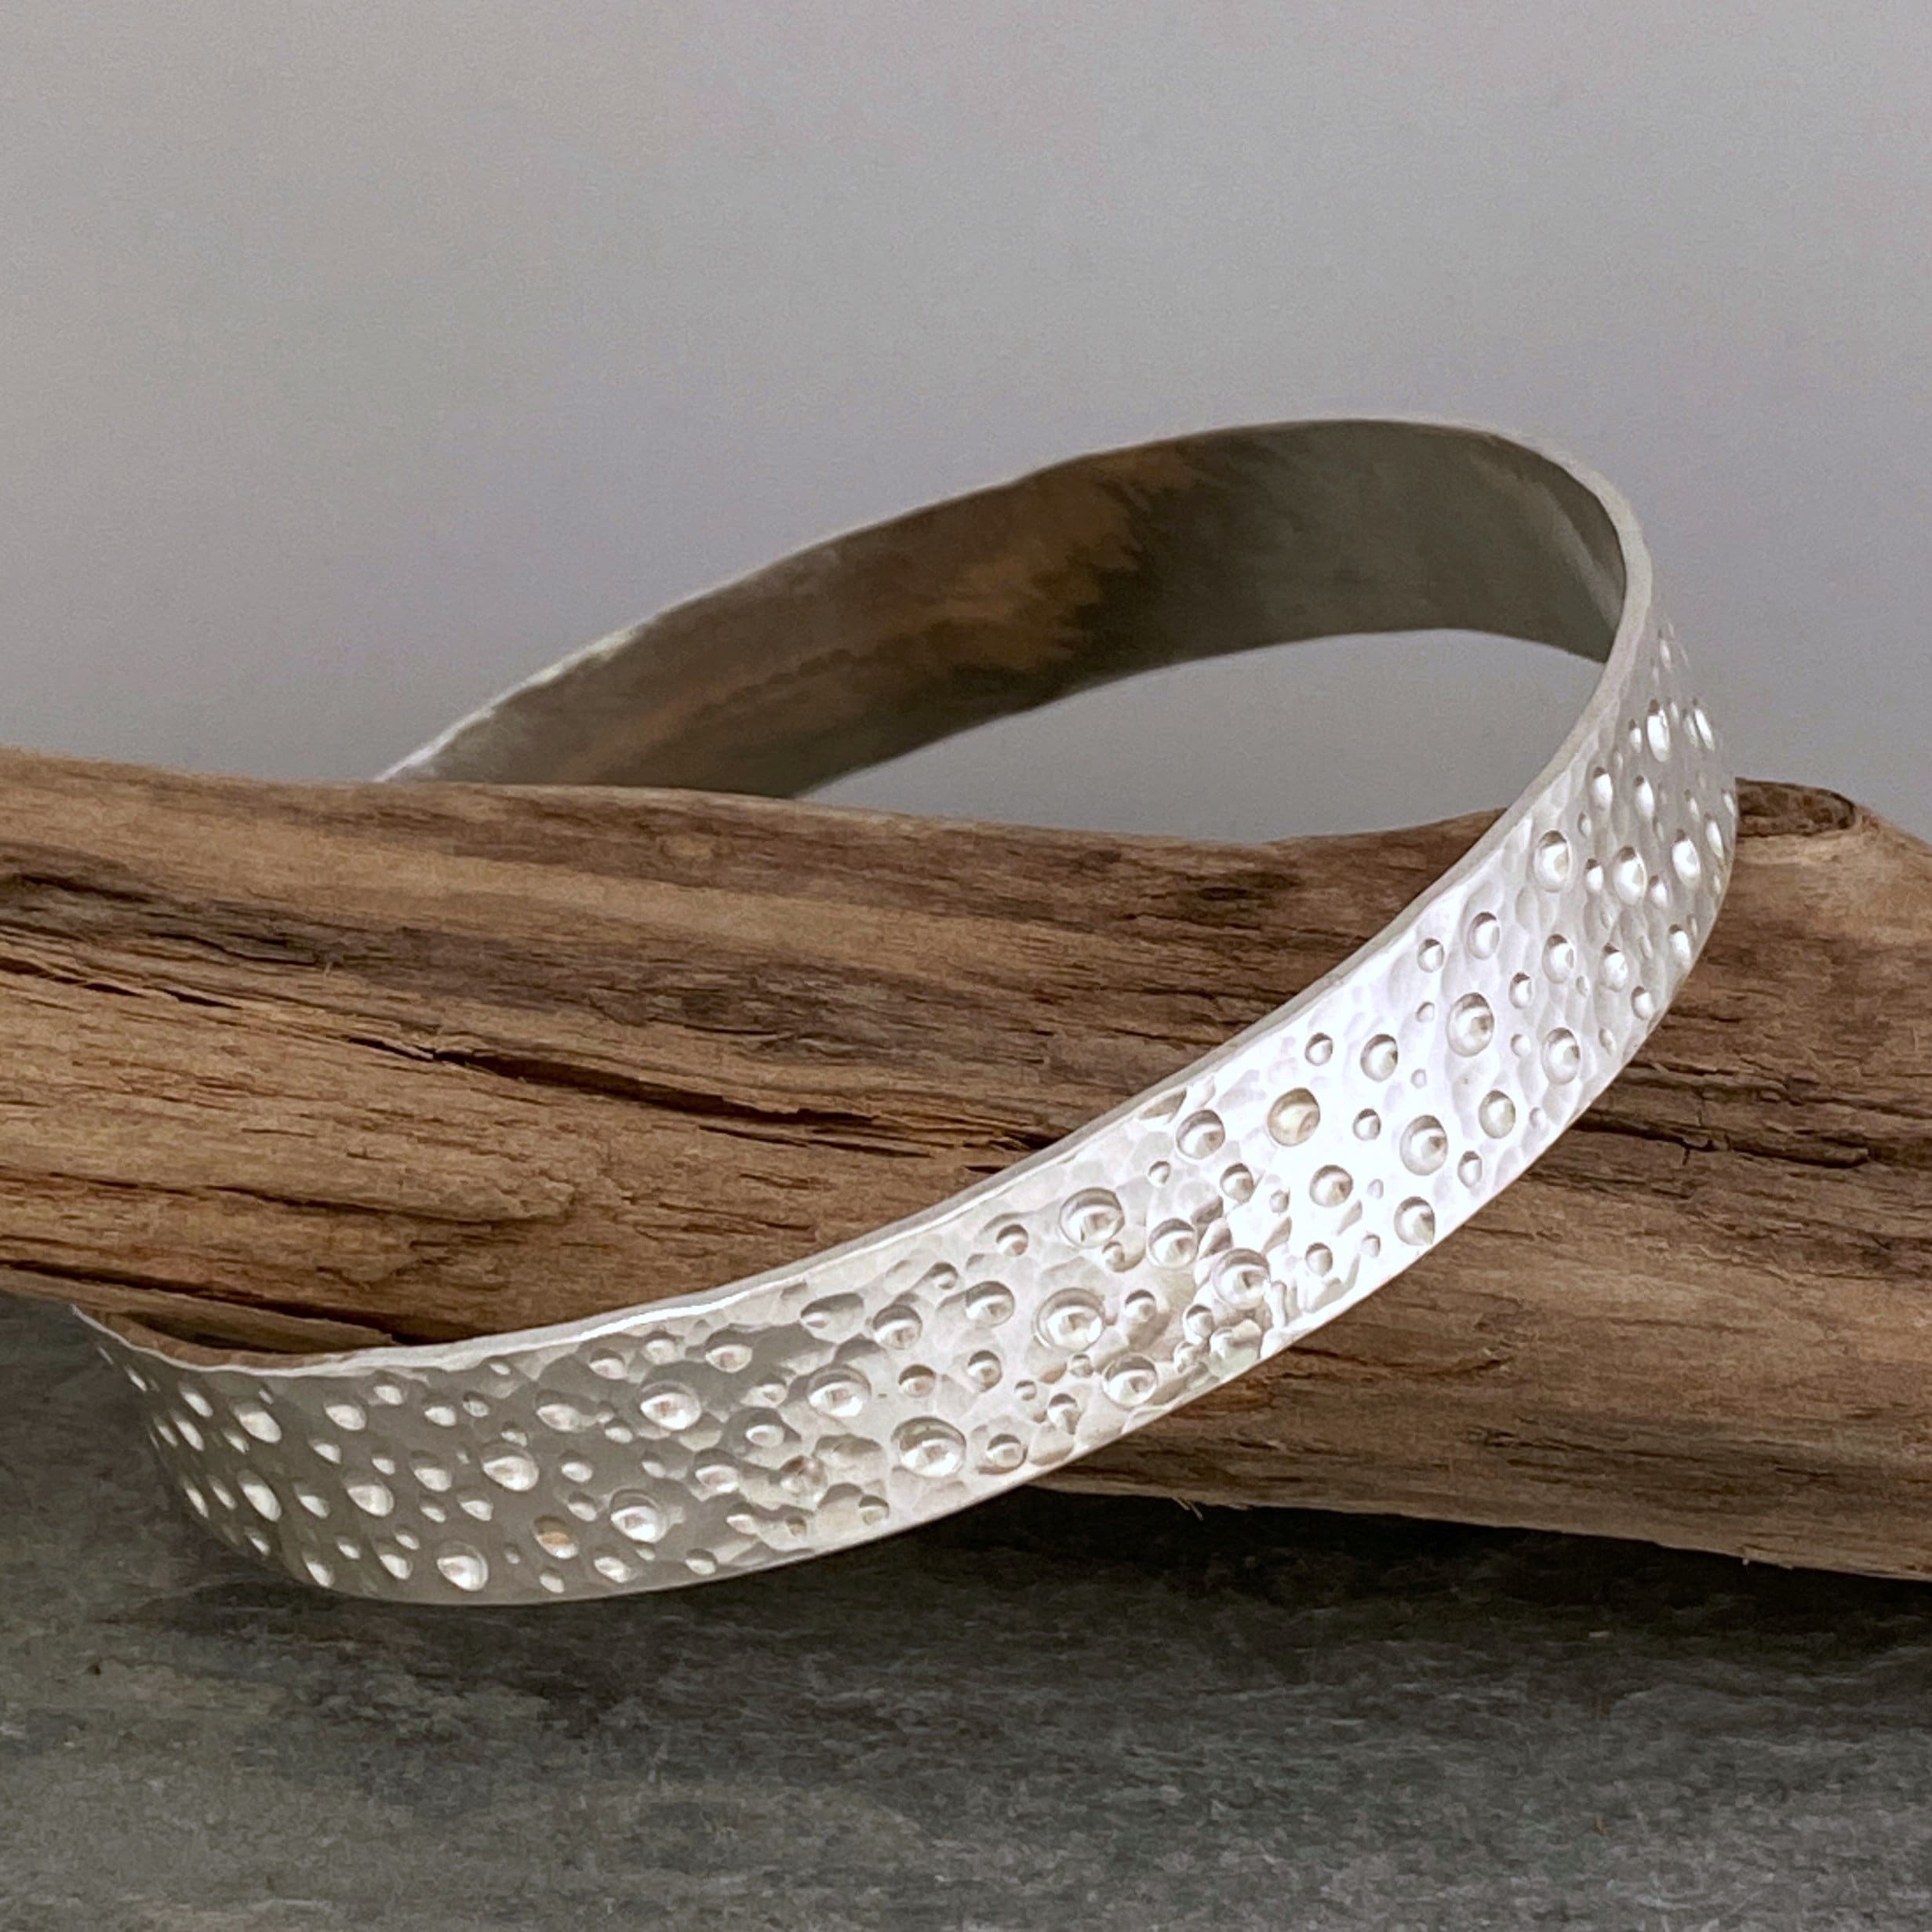 Wide Hammered Silver Bangle With A Unique Bubbles Pattern, Made From Recycled Sterling